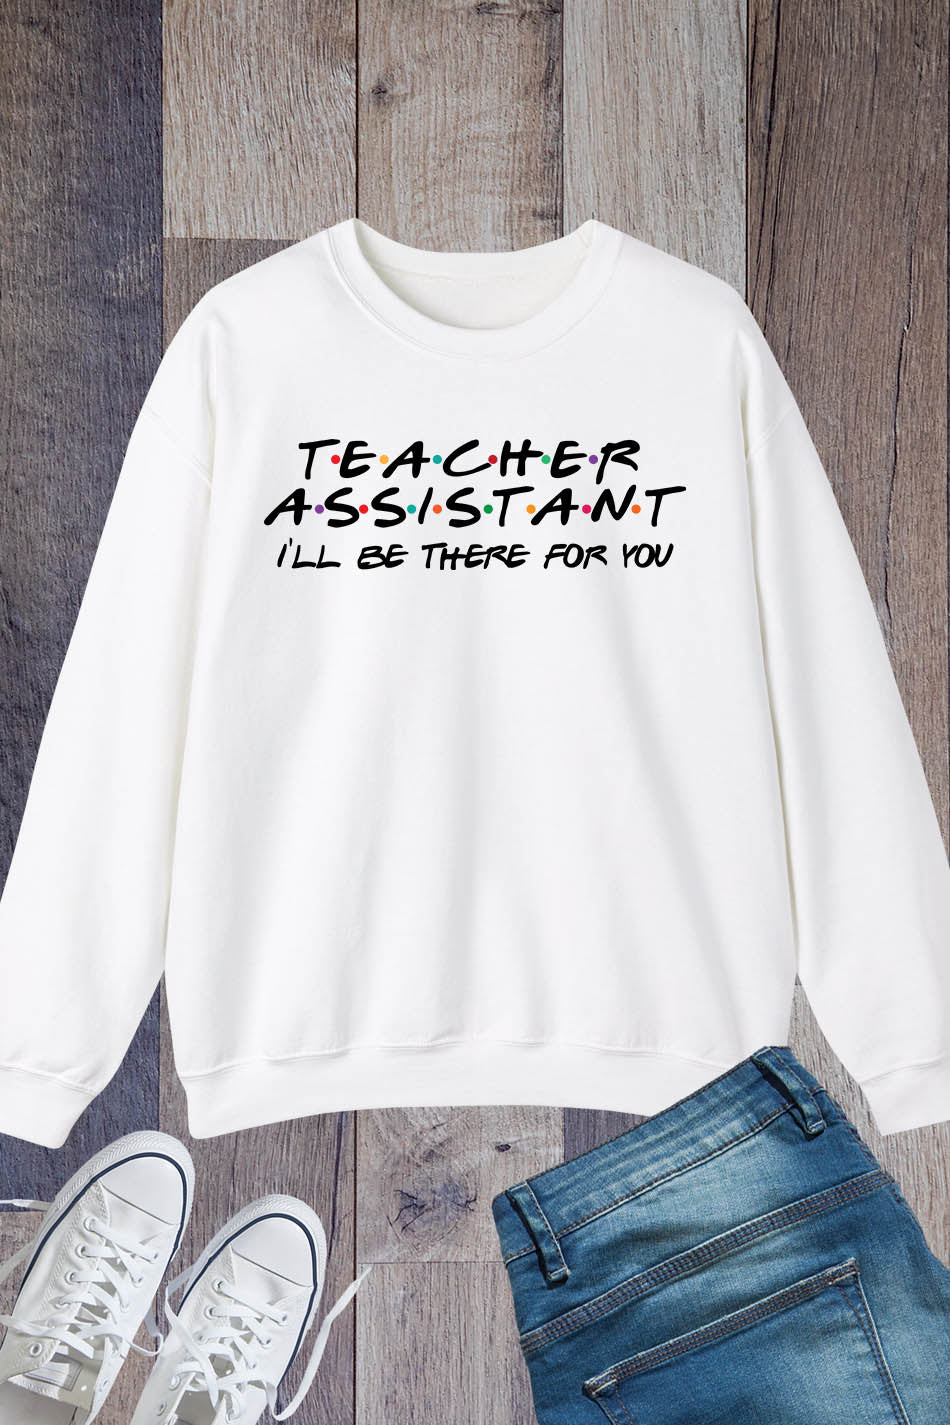 I Will Be There For You Teacher AssistanSweatshirt